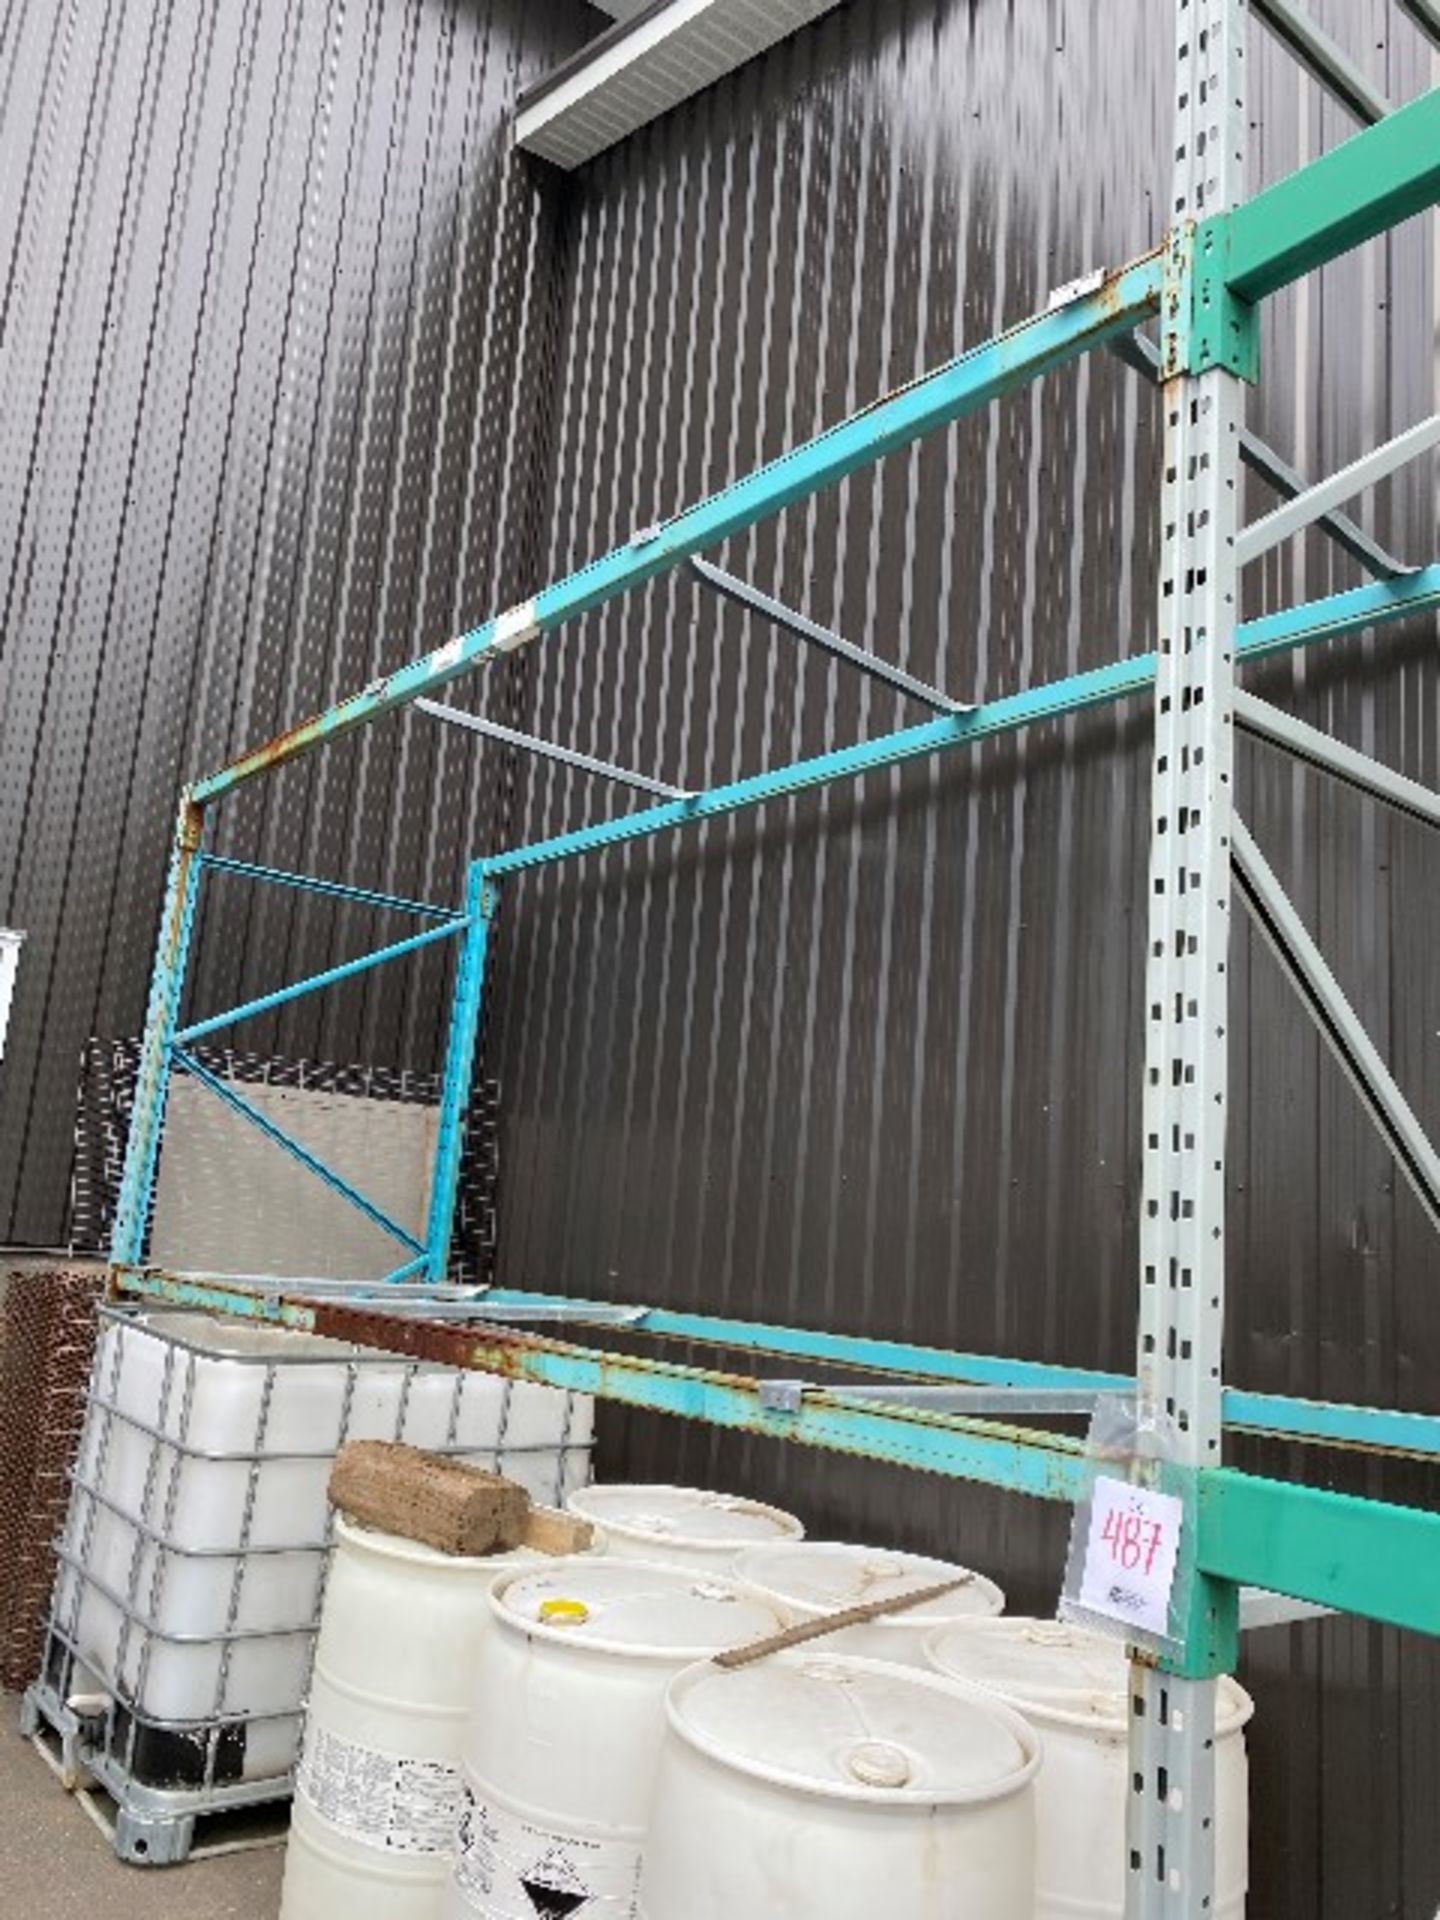 Industrial shelving, 3pcs uprights, 8pcs cross bars, 12pcs safety bars, 8' x 8' x 44”, 2 sections - Image 3 of 3